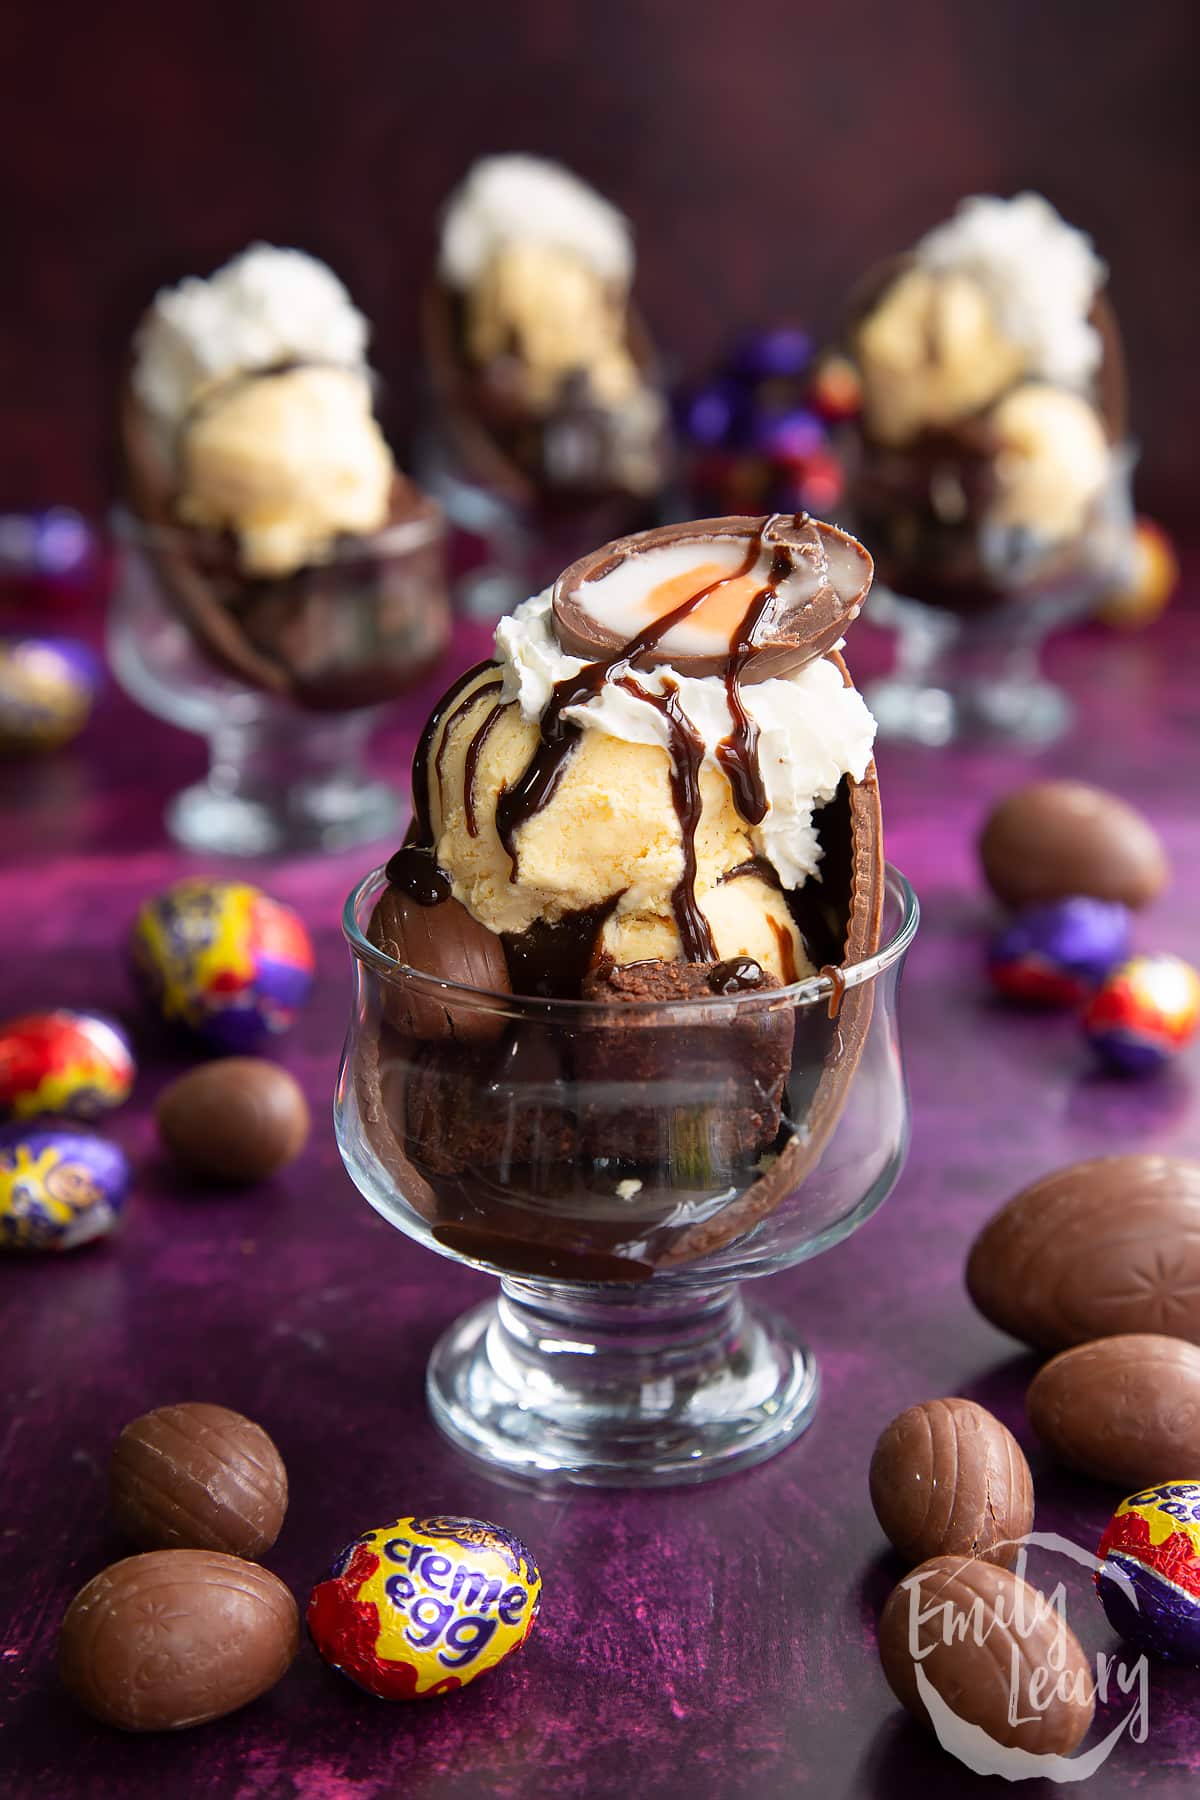 Drizzled chocolate being added to the top of the Easter egg sundae